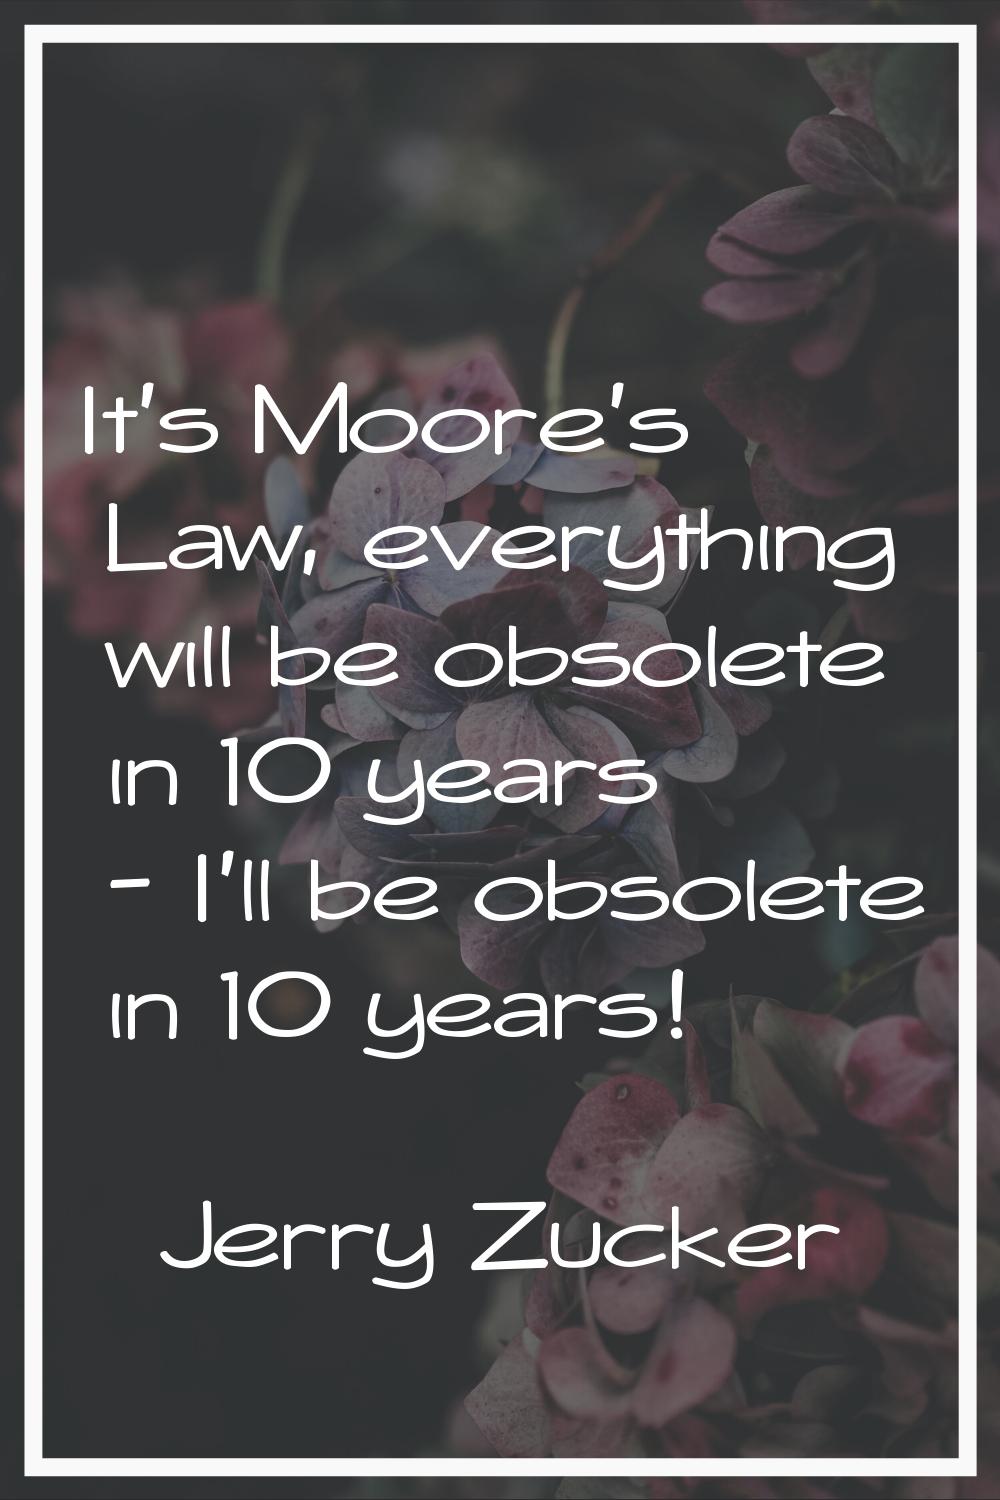 It's Moore's Law, everything will be obsolete in 10 years - I'll be obsolete in 10 years!